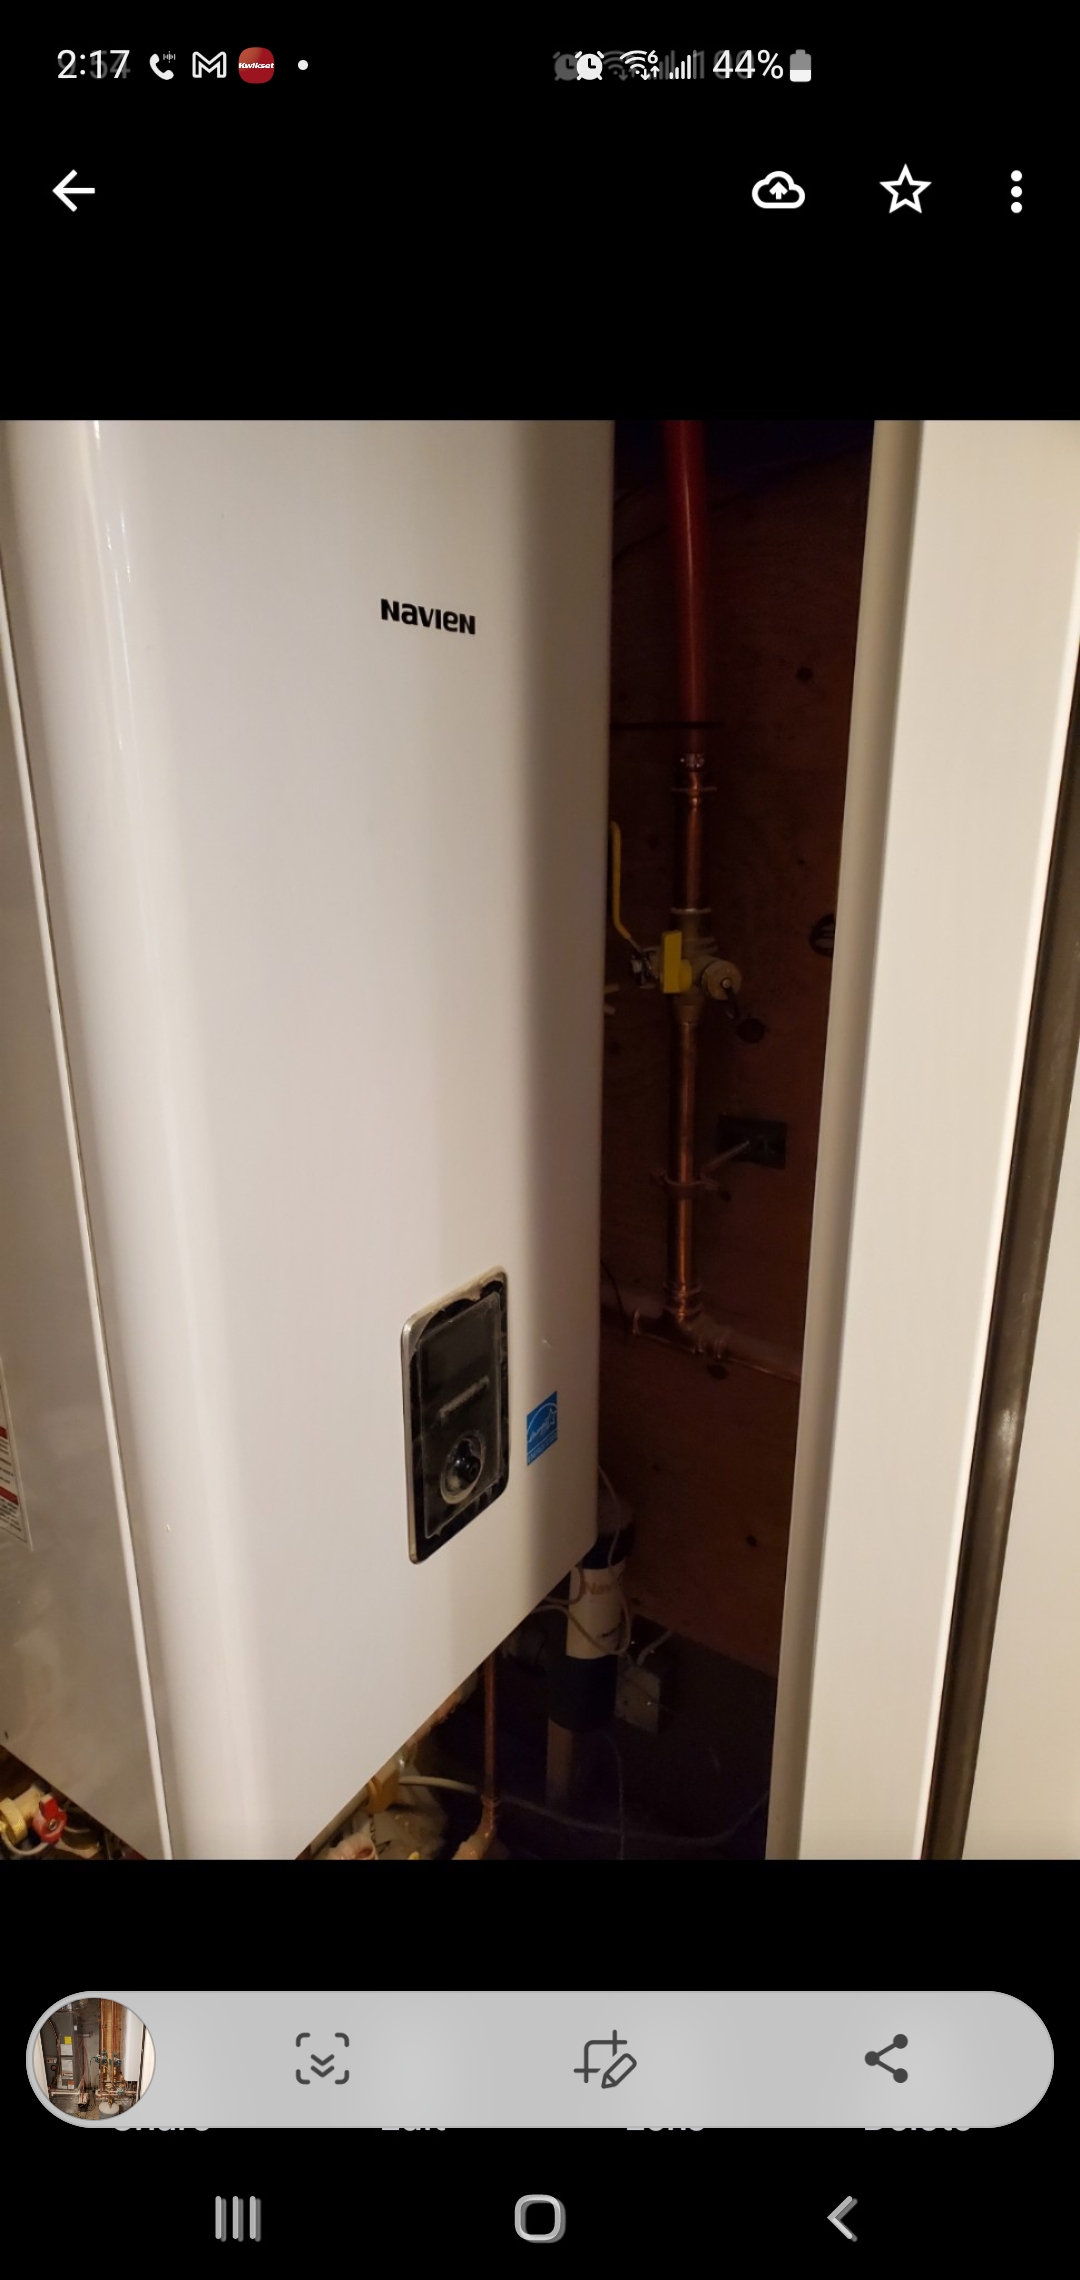 Not Enough Serving Clearance for Navien Unit